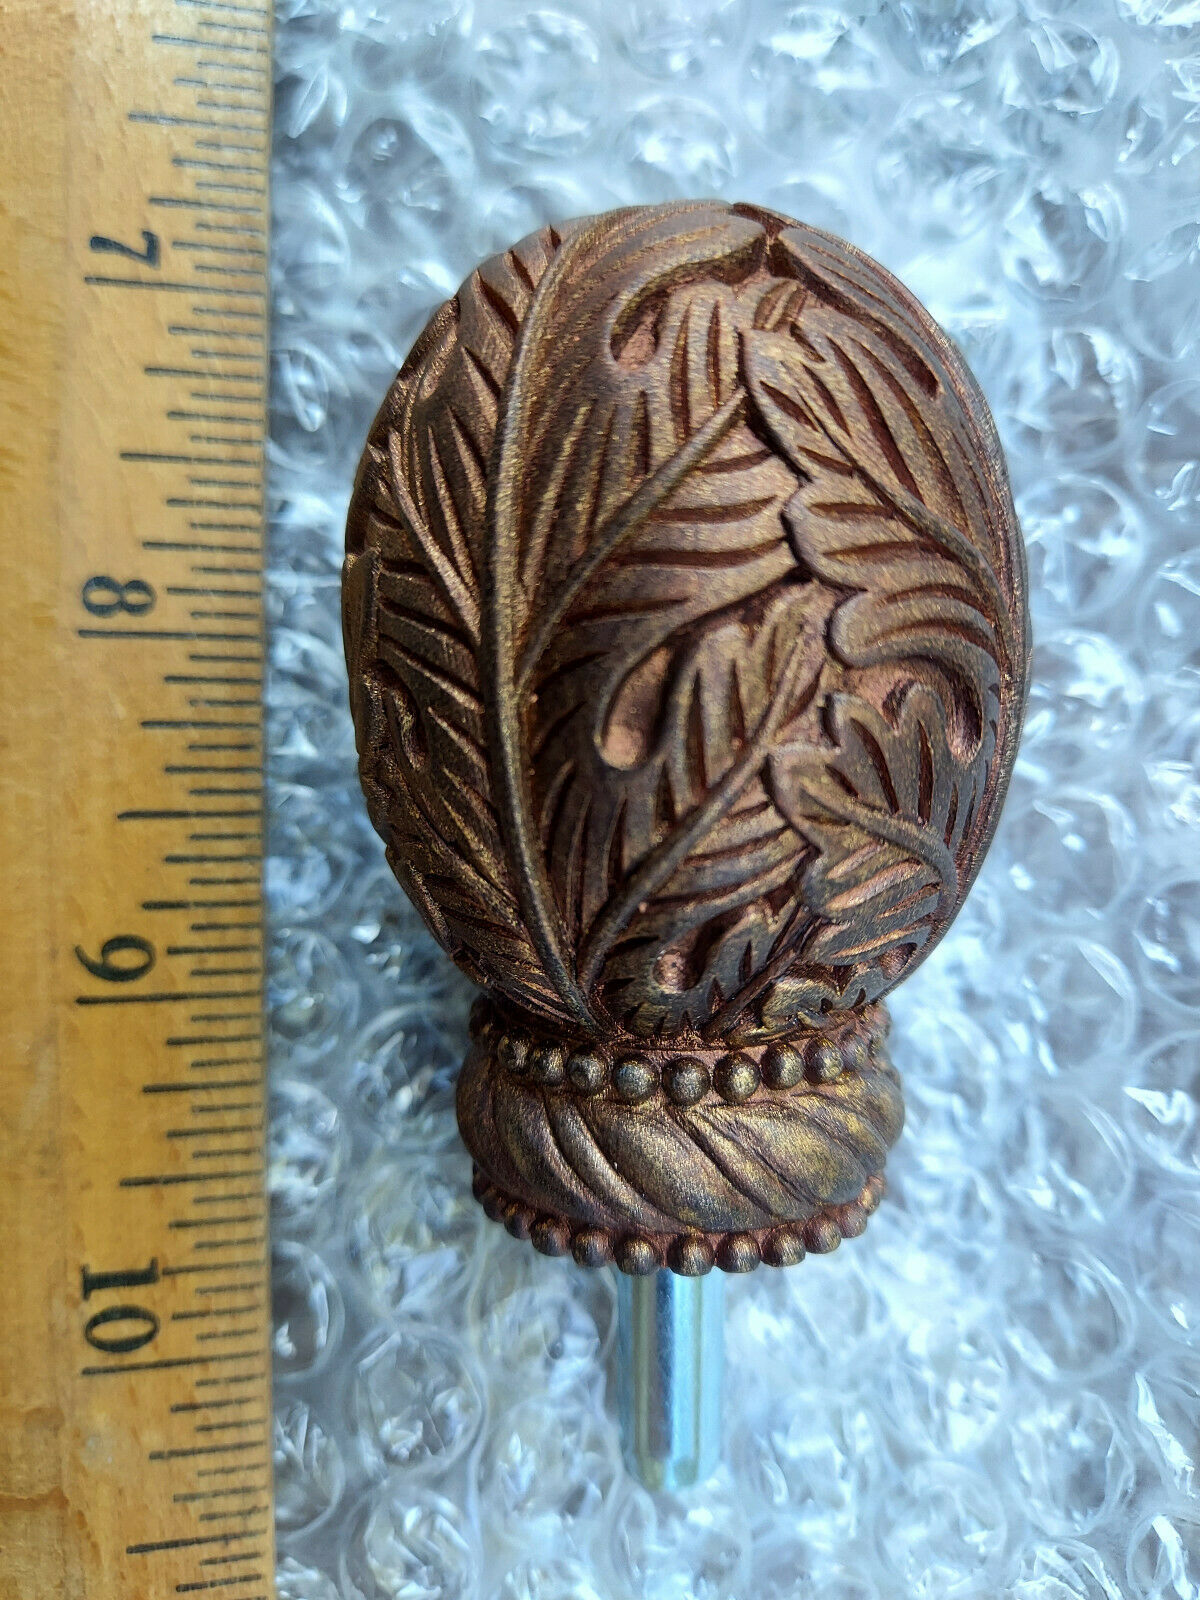 Primary image for 21OO42 "PINEAPPLES", ADF06-07 SILVER COCOA, 2-1/2" TALL X 1-5/8" DIAMETER, NEW